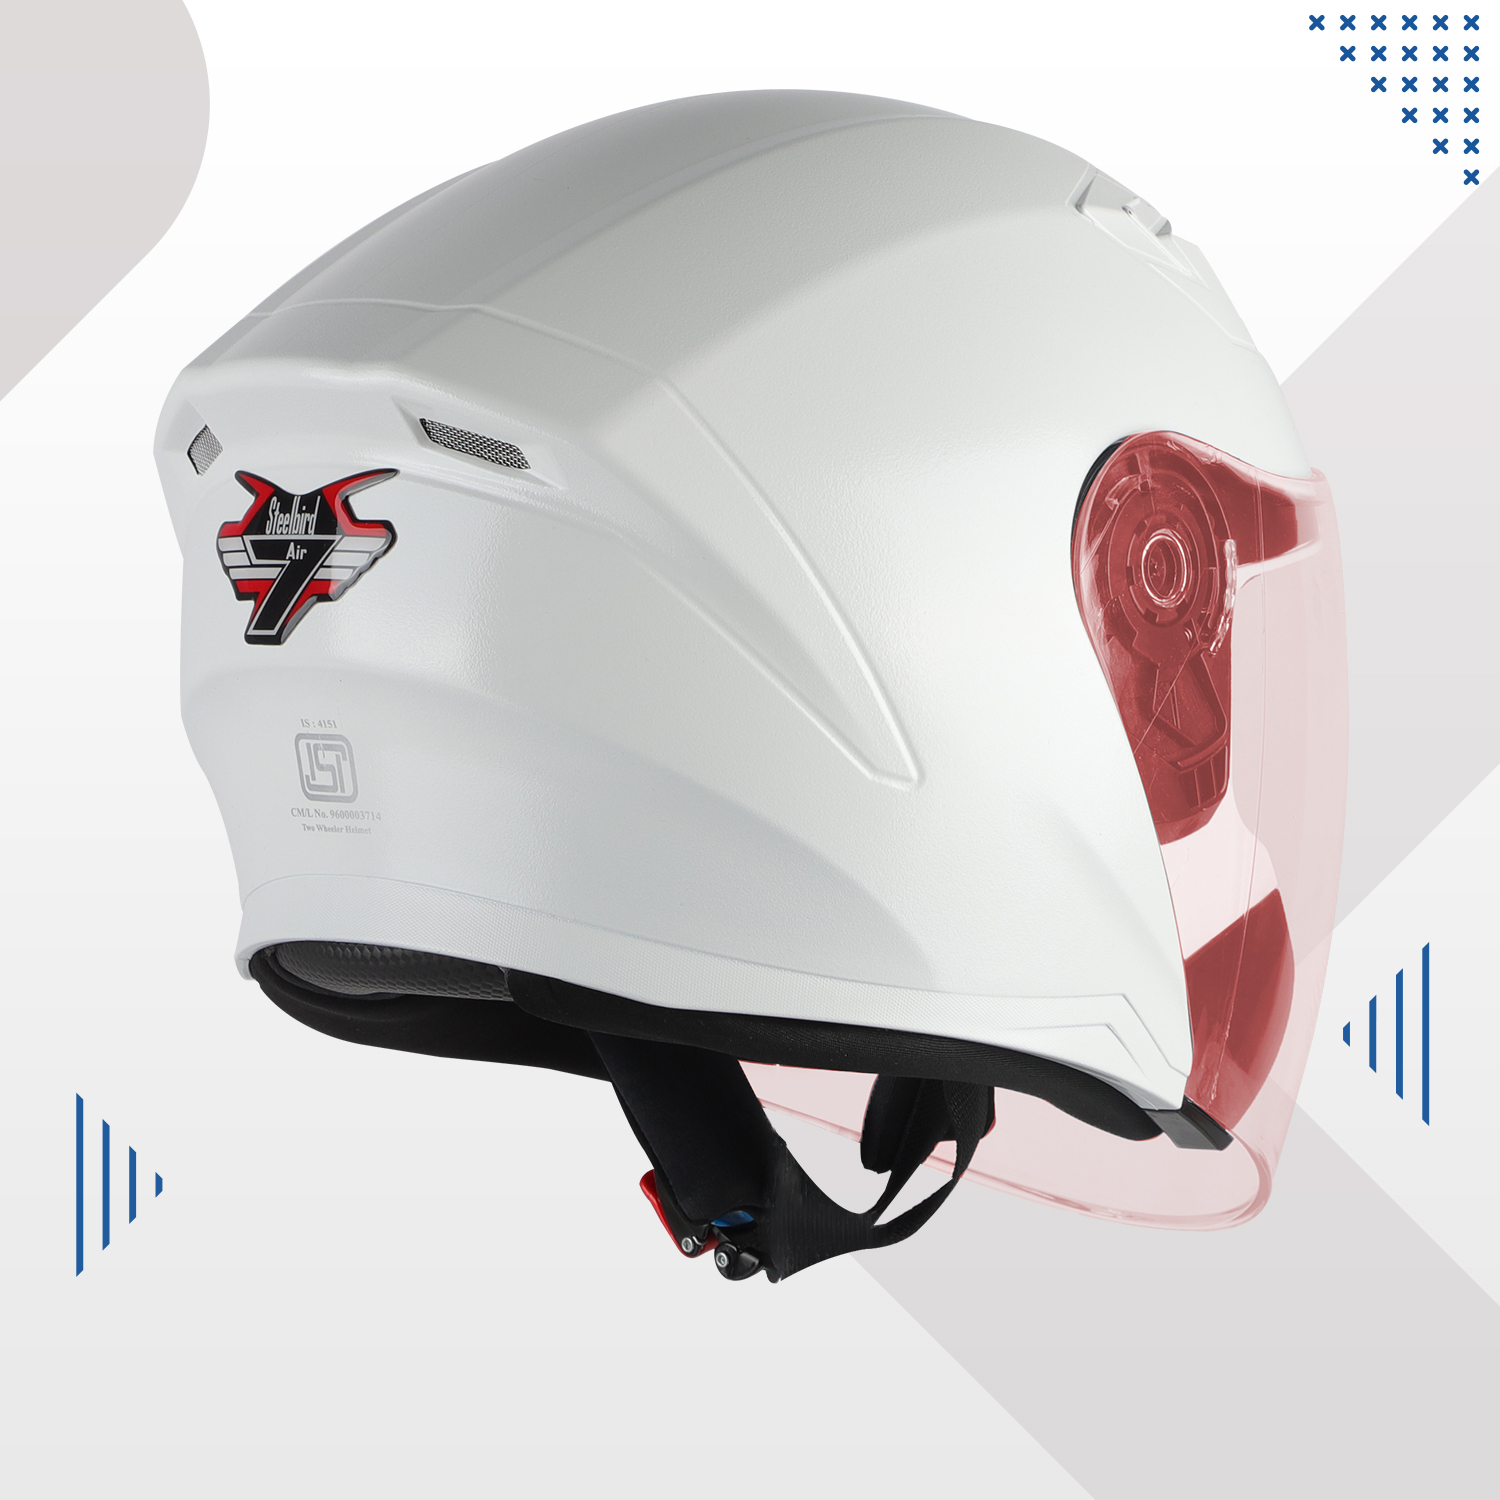 Steelbird SBA-17 7Wings ISI Certified Open Face Helmet For Men And Women (Dashing White With Tinted Red Visor)